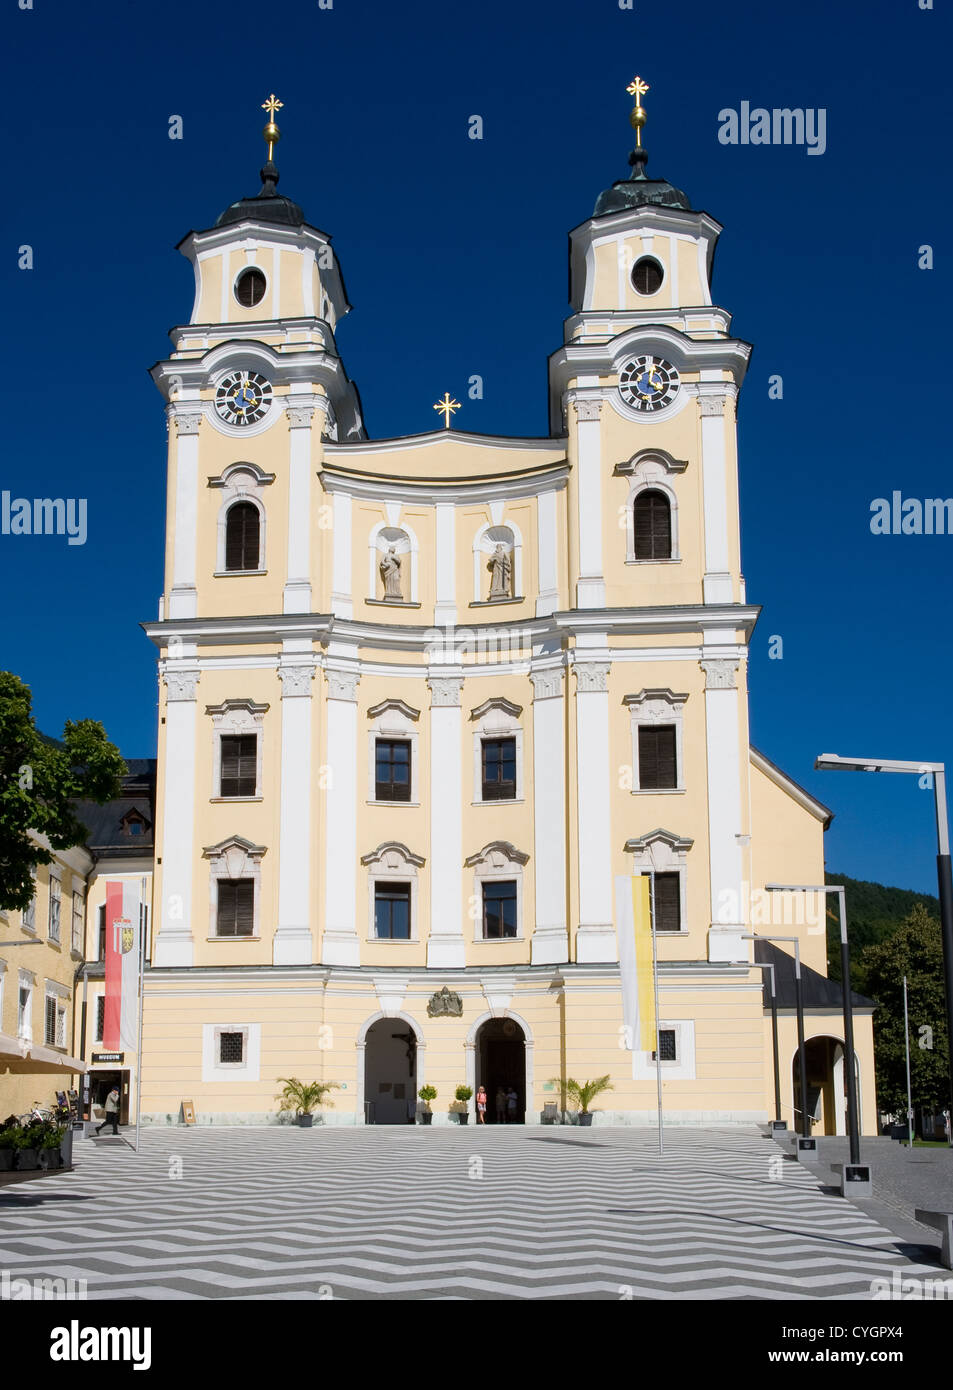 The exterior of the collegiate church in the city of mondsee in Austria. The wedding scenes from the hollywood movie 'The Sound Stock Photo